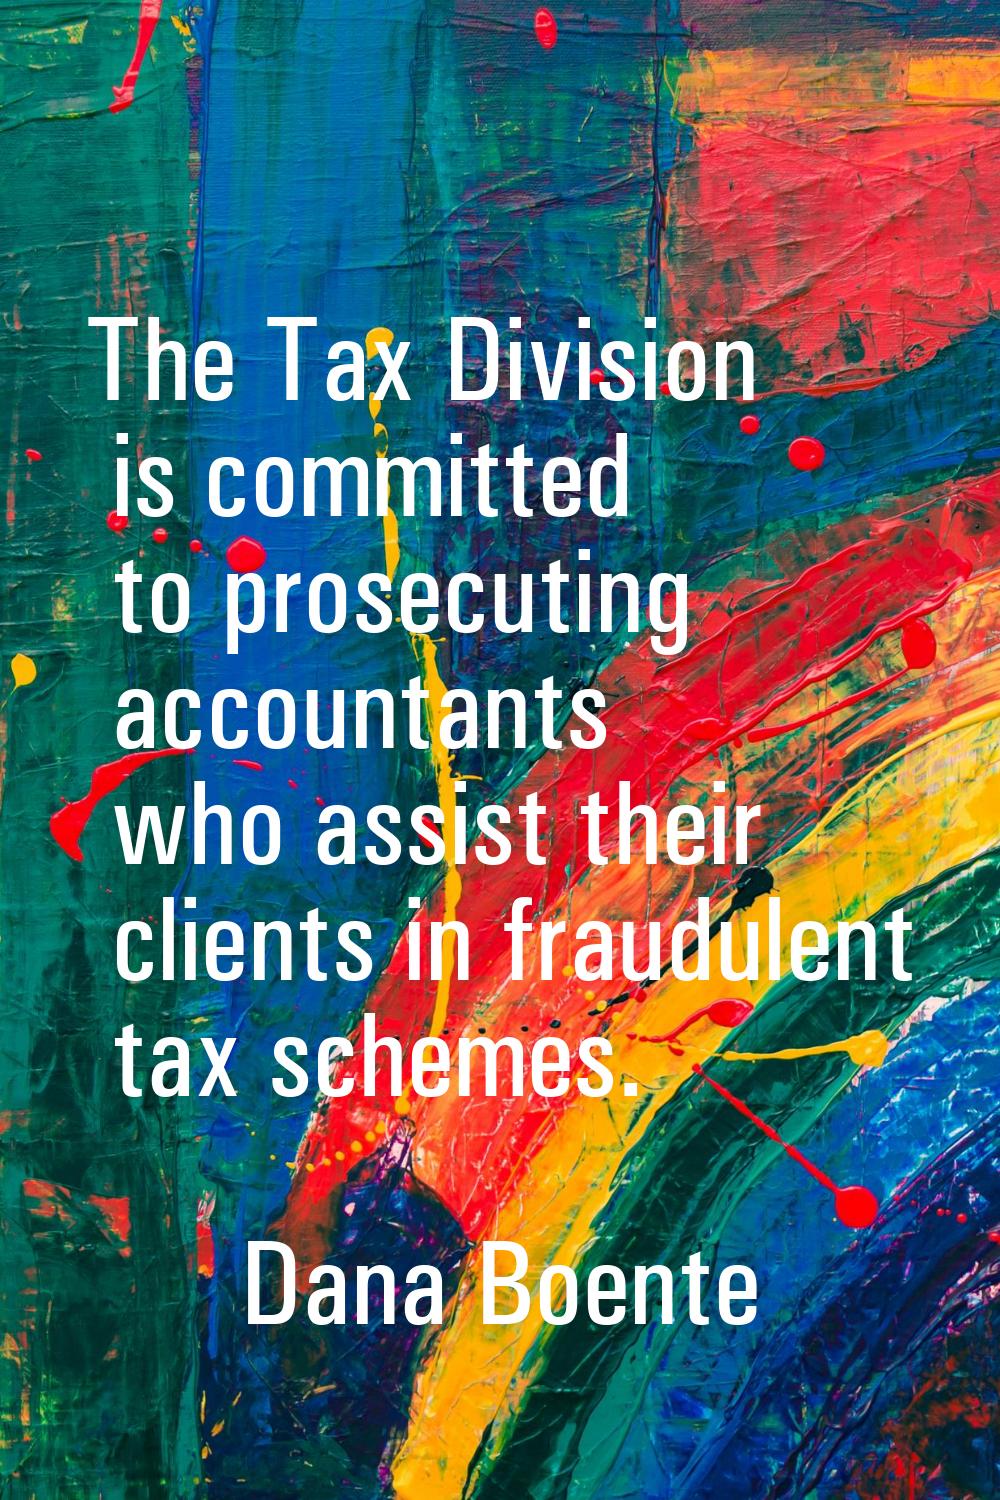 The Tax Division is committed to prosecuting accountants who assist their clients in fraudulent tax